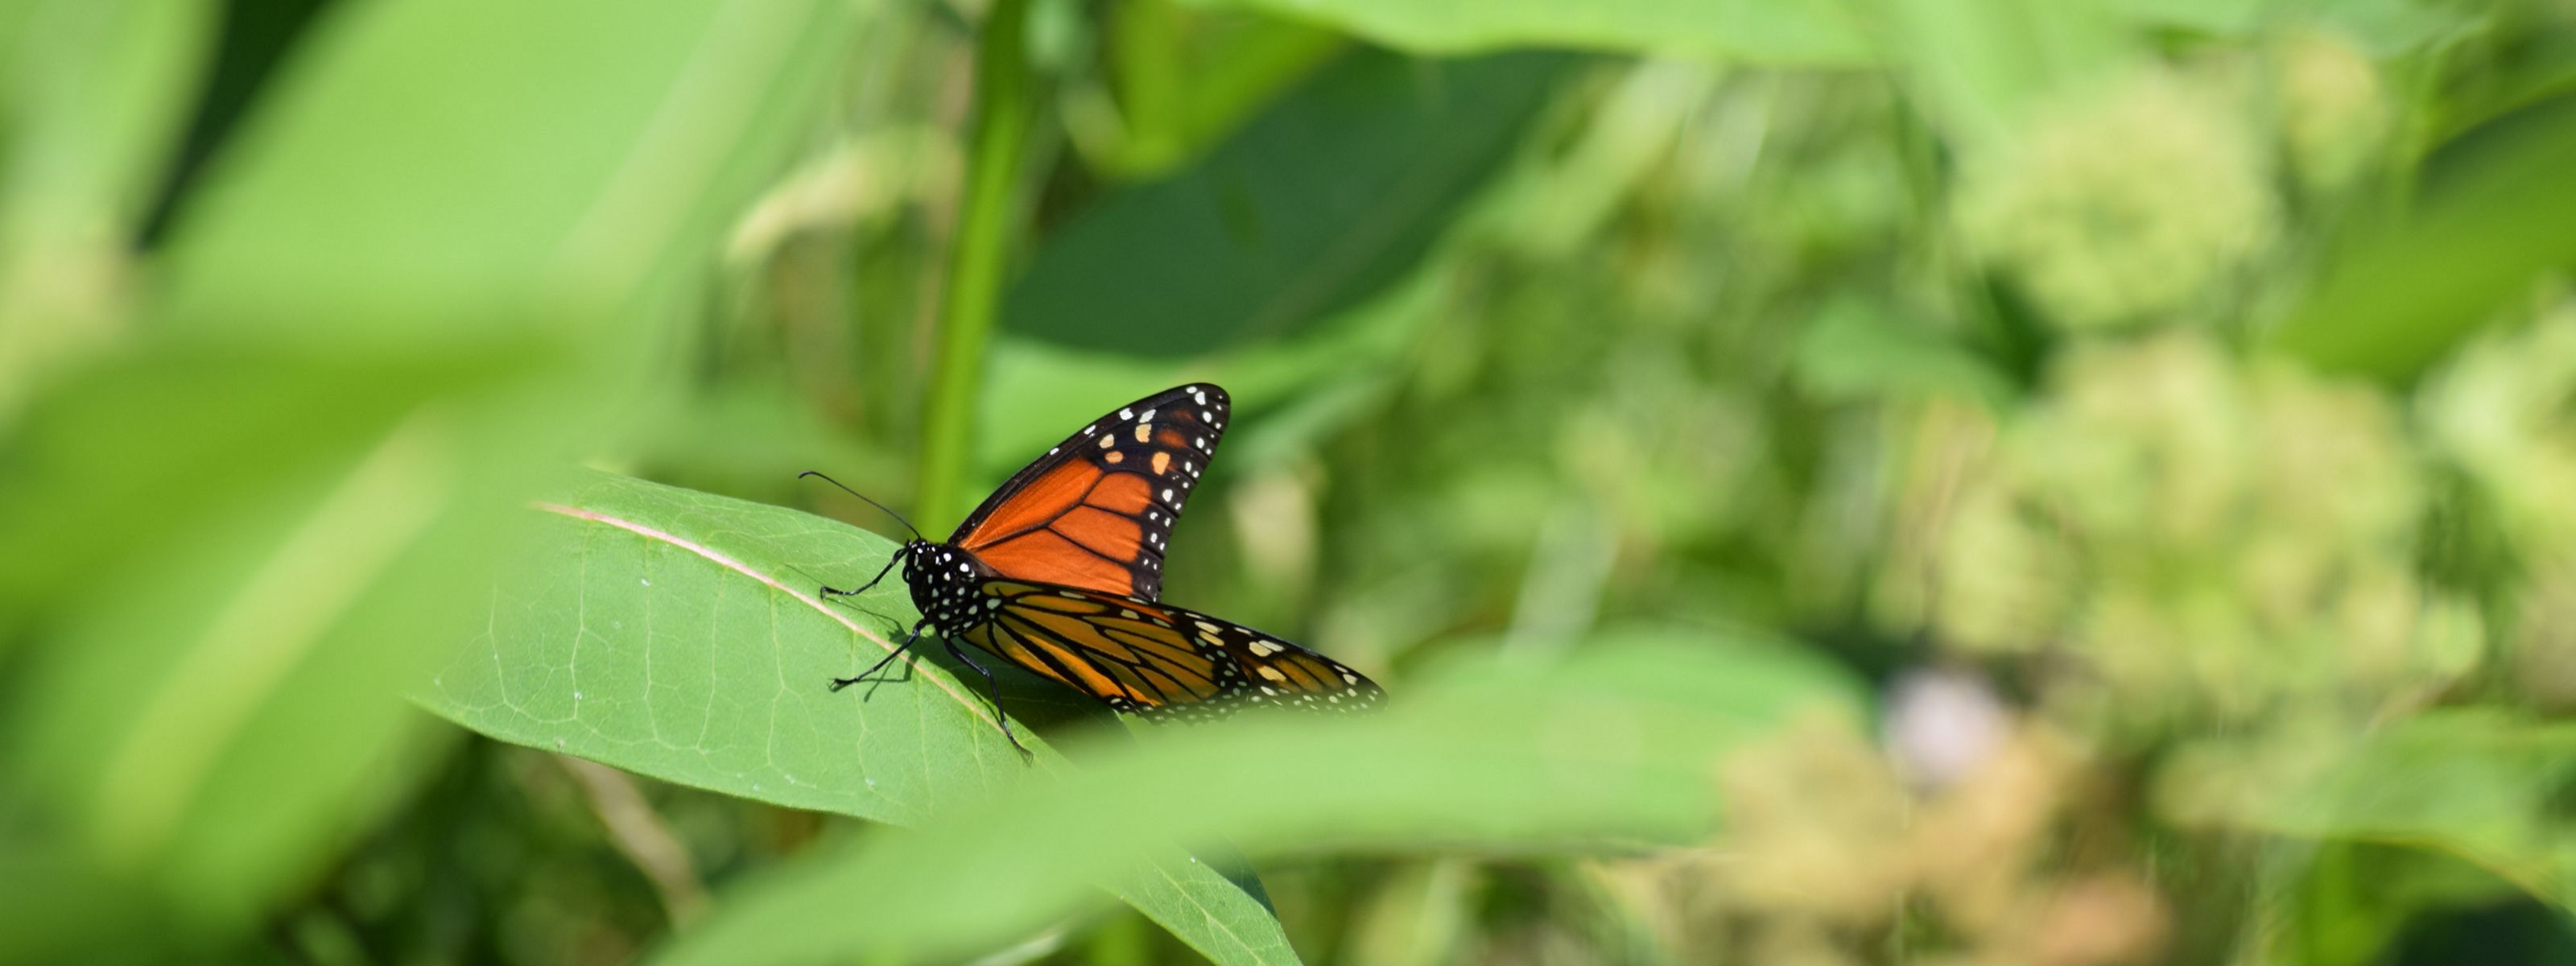 A monarch butterfly is perched on top of a plant with long and brightly colored green leaves.